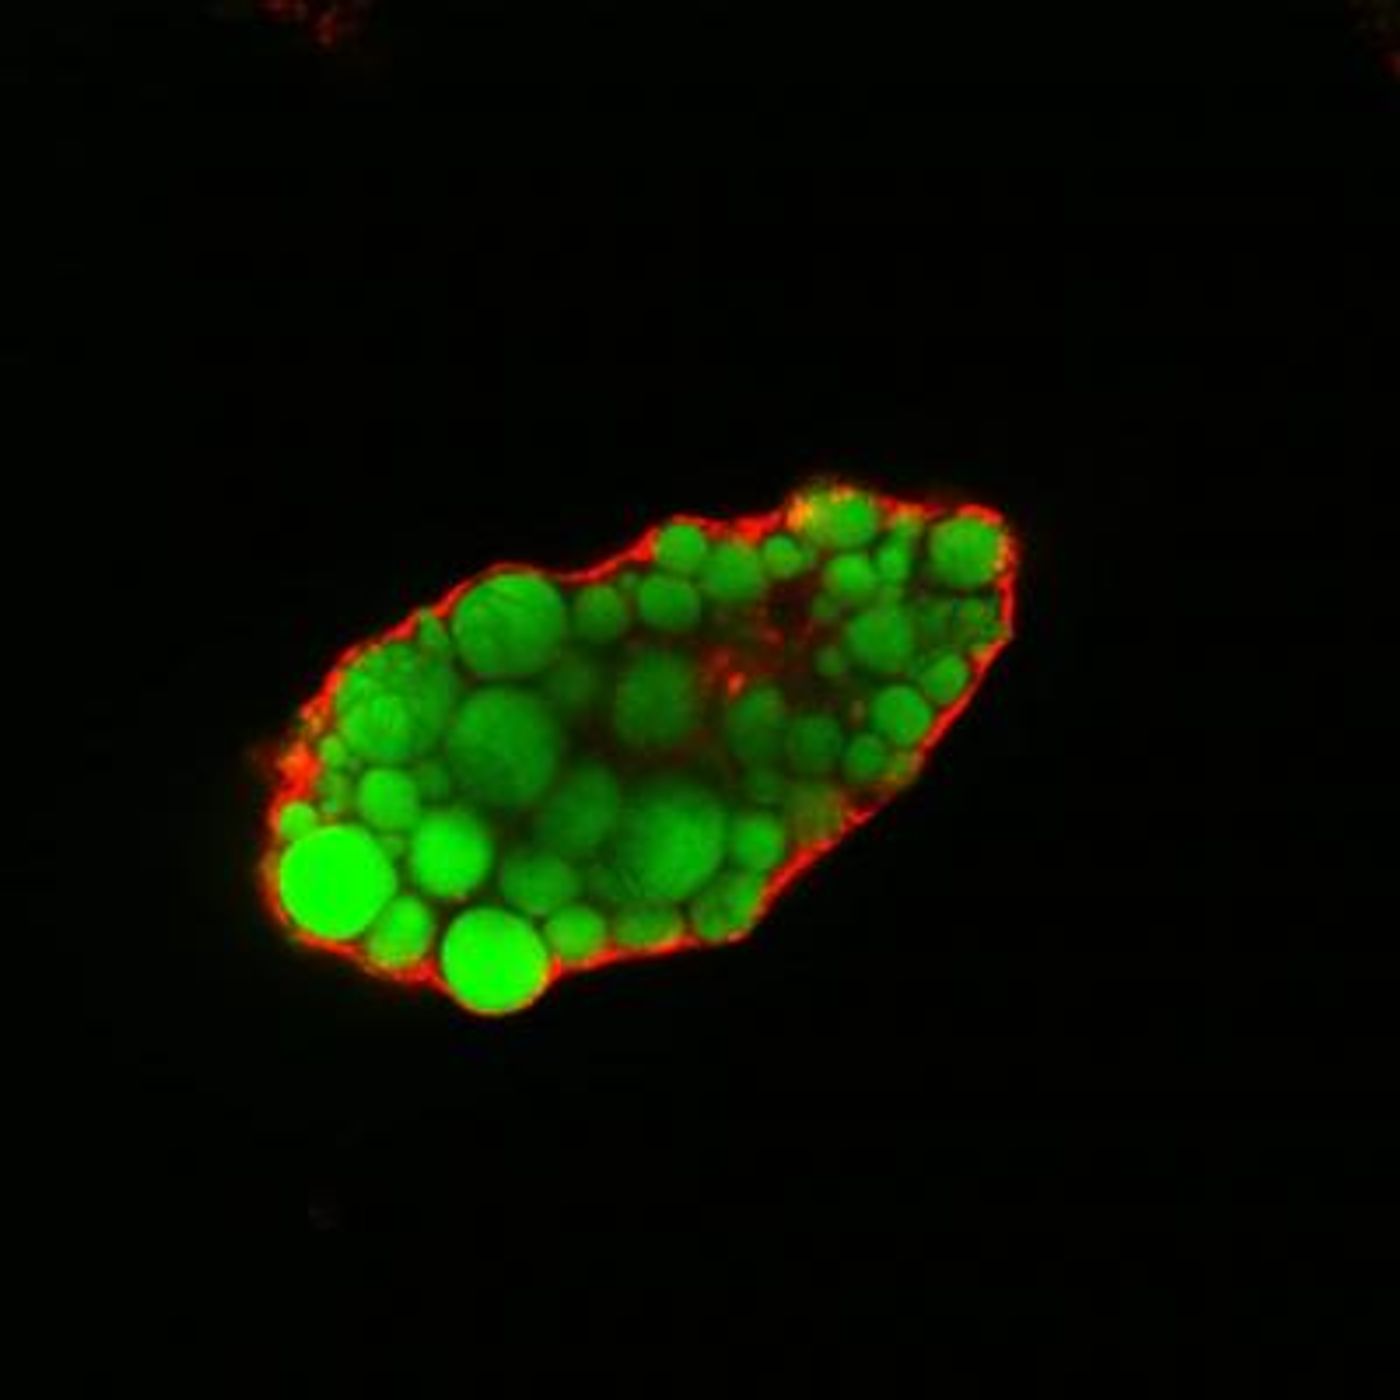 Lipid droplets (colored) in a fat cell that lacks EHD2. / Credit: Claudia Matthaeus, MDC